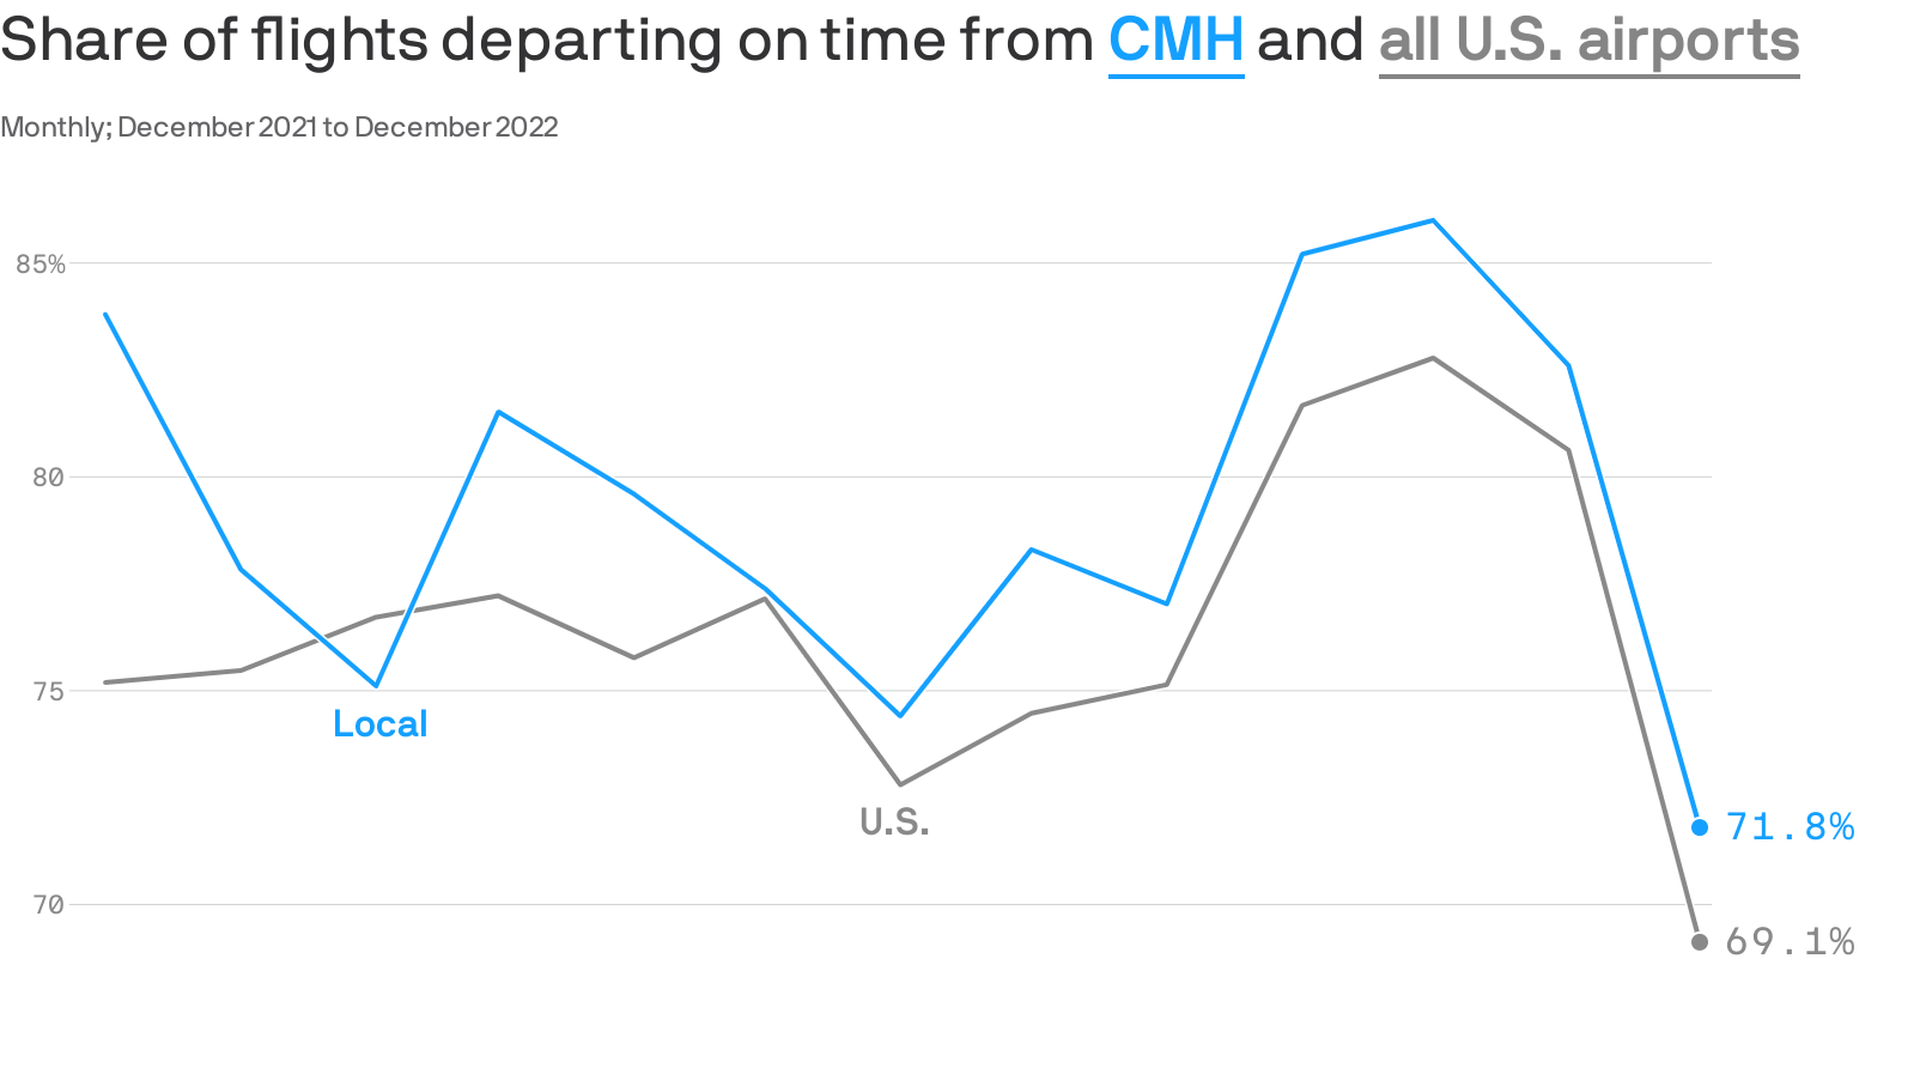 A chart showing share of flights departing on time from CMH and all U.S. airports.